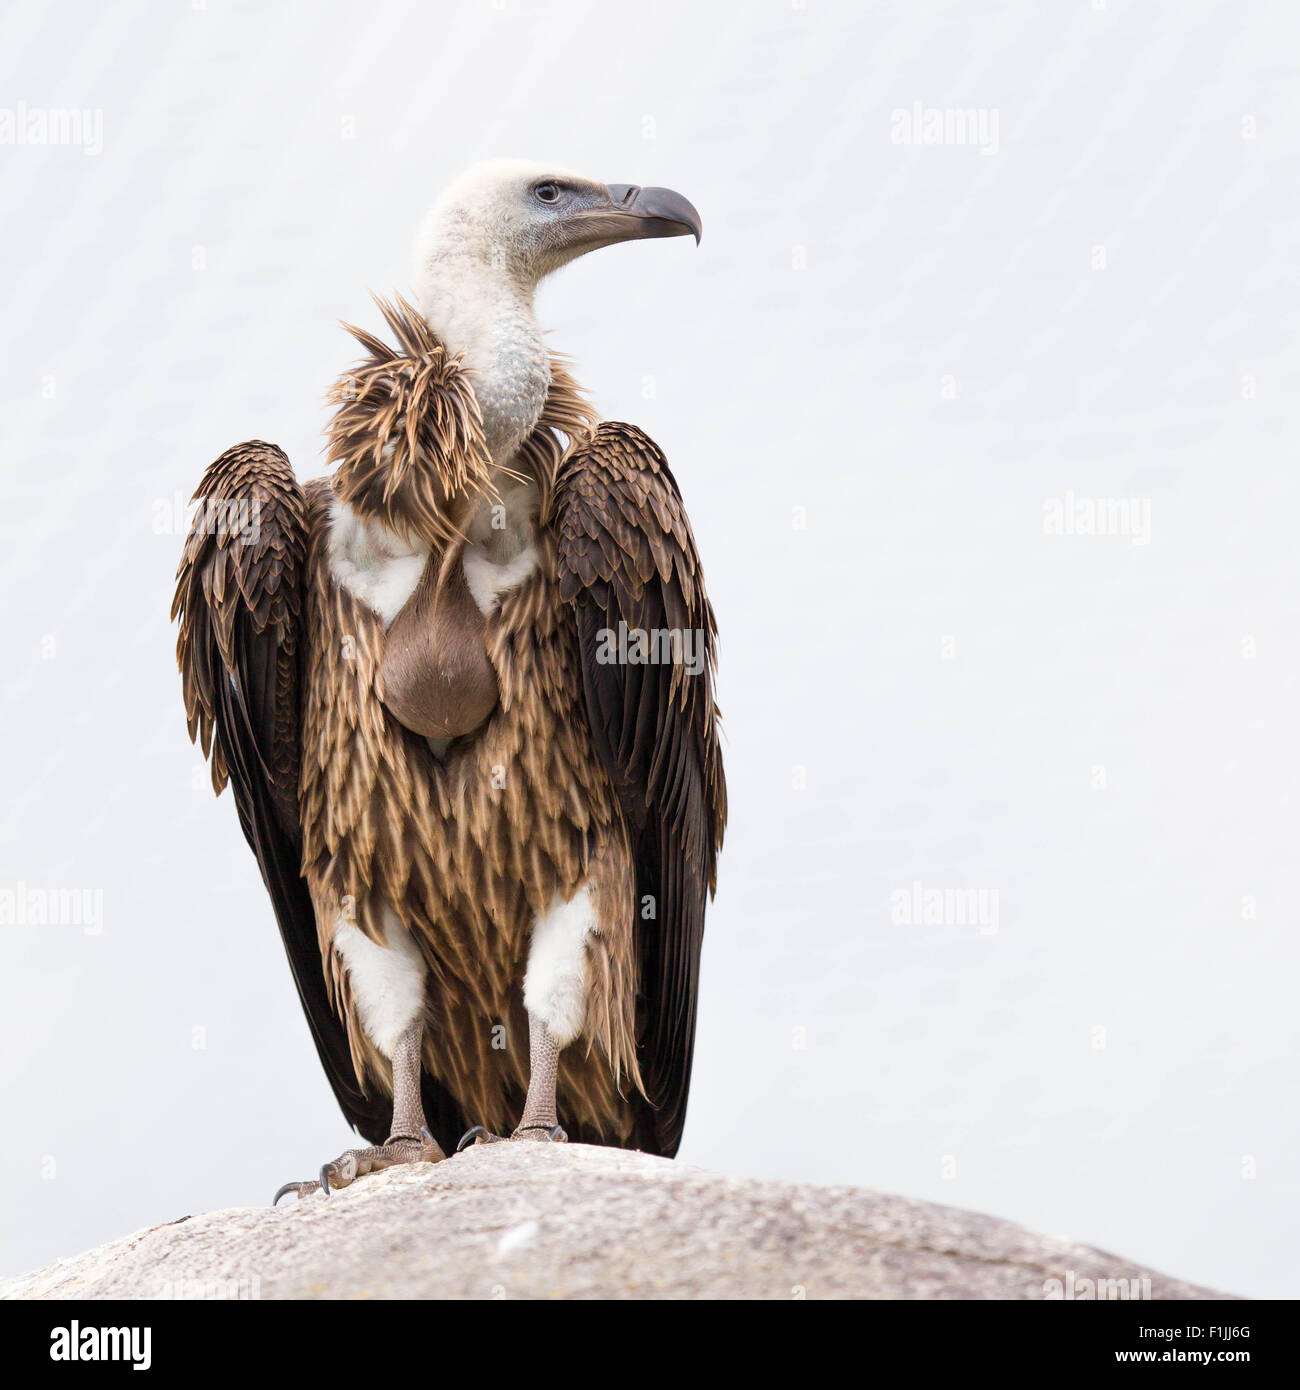 Adult condor close up on an light background Stock Photo